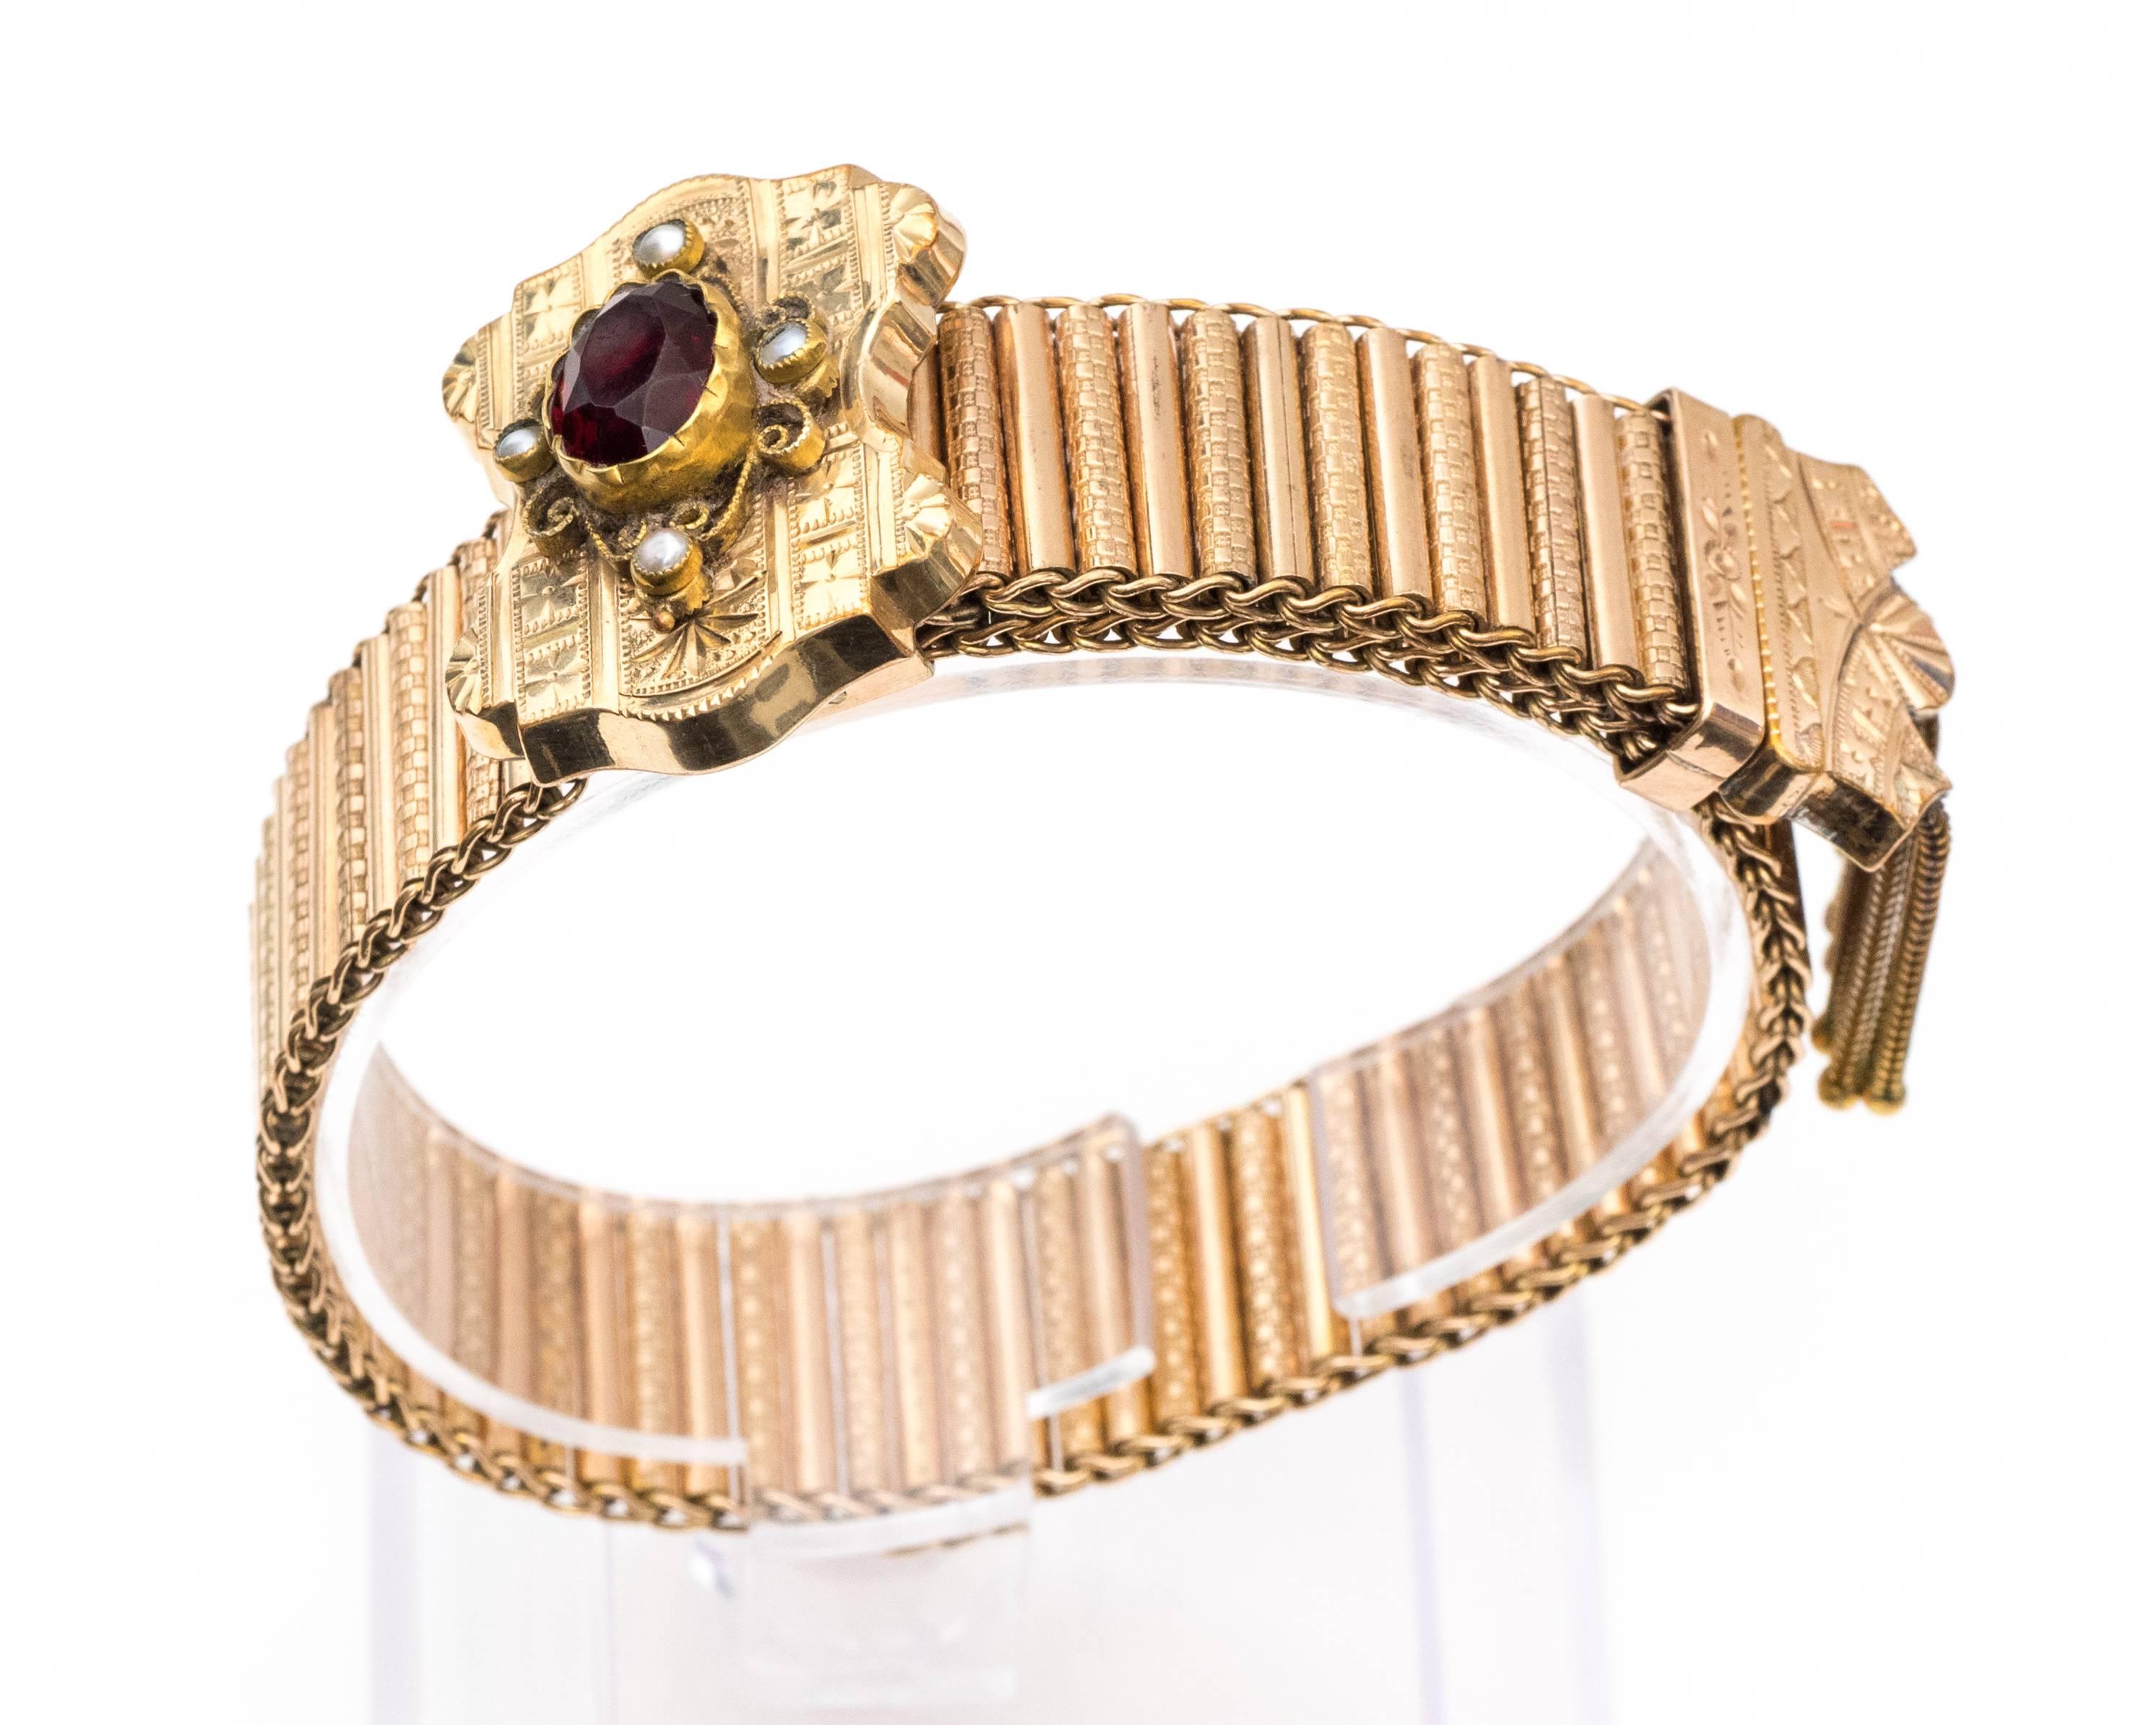 Very Unique 1890s Bracelet
Crafted with metal sheets that have rolled gold over the surface.
Looks similar to a standard gold bracelet, but with lasting integrity from the more durable metals underneath the shiny surface. The bracelet is linked in a